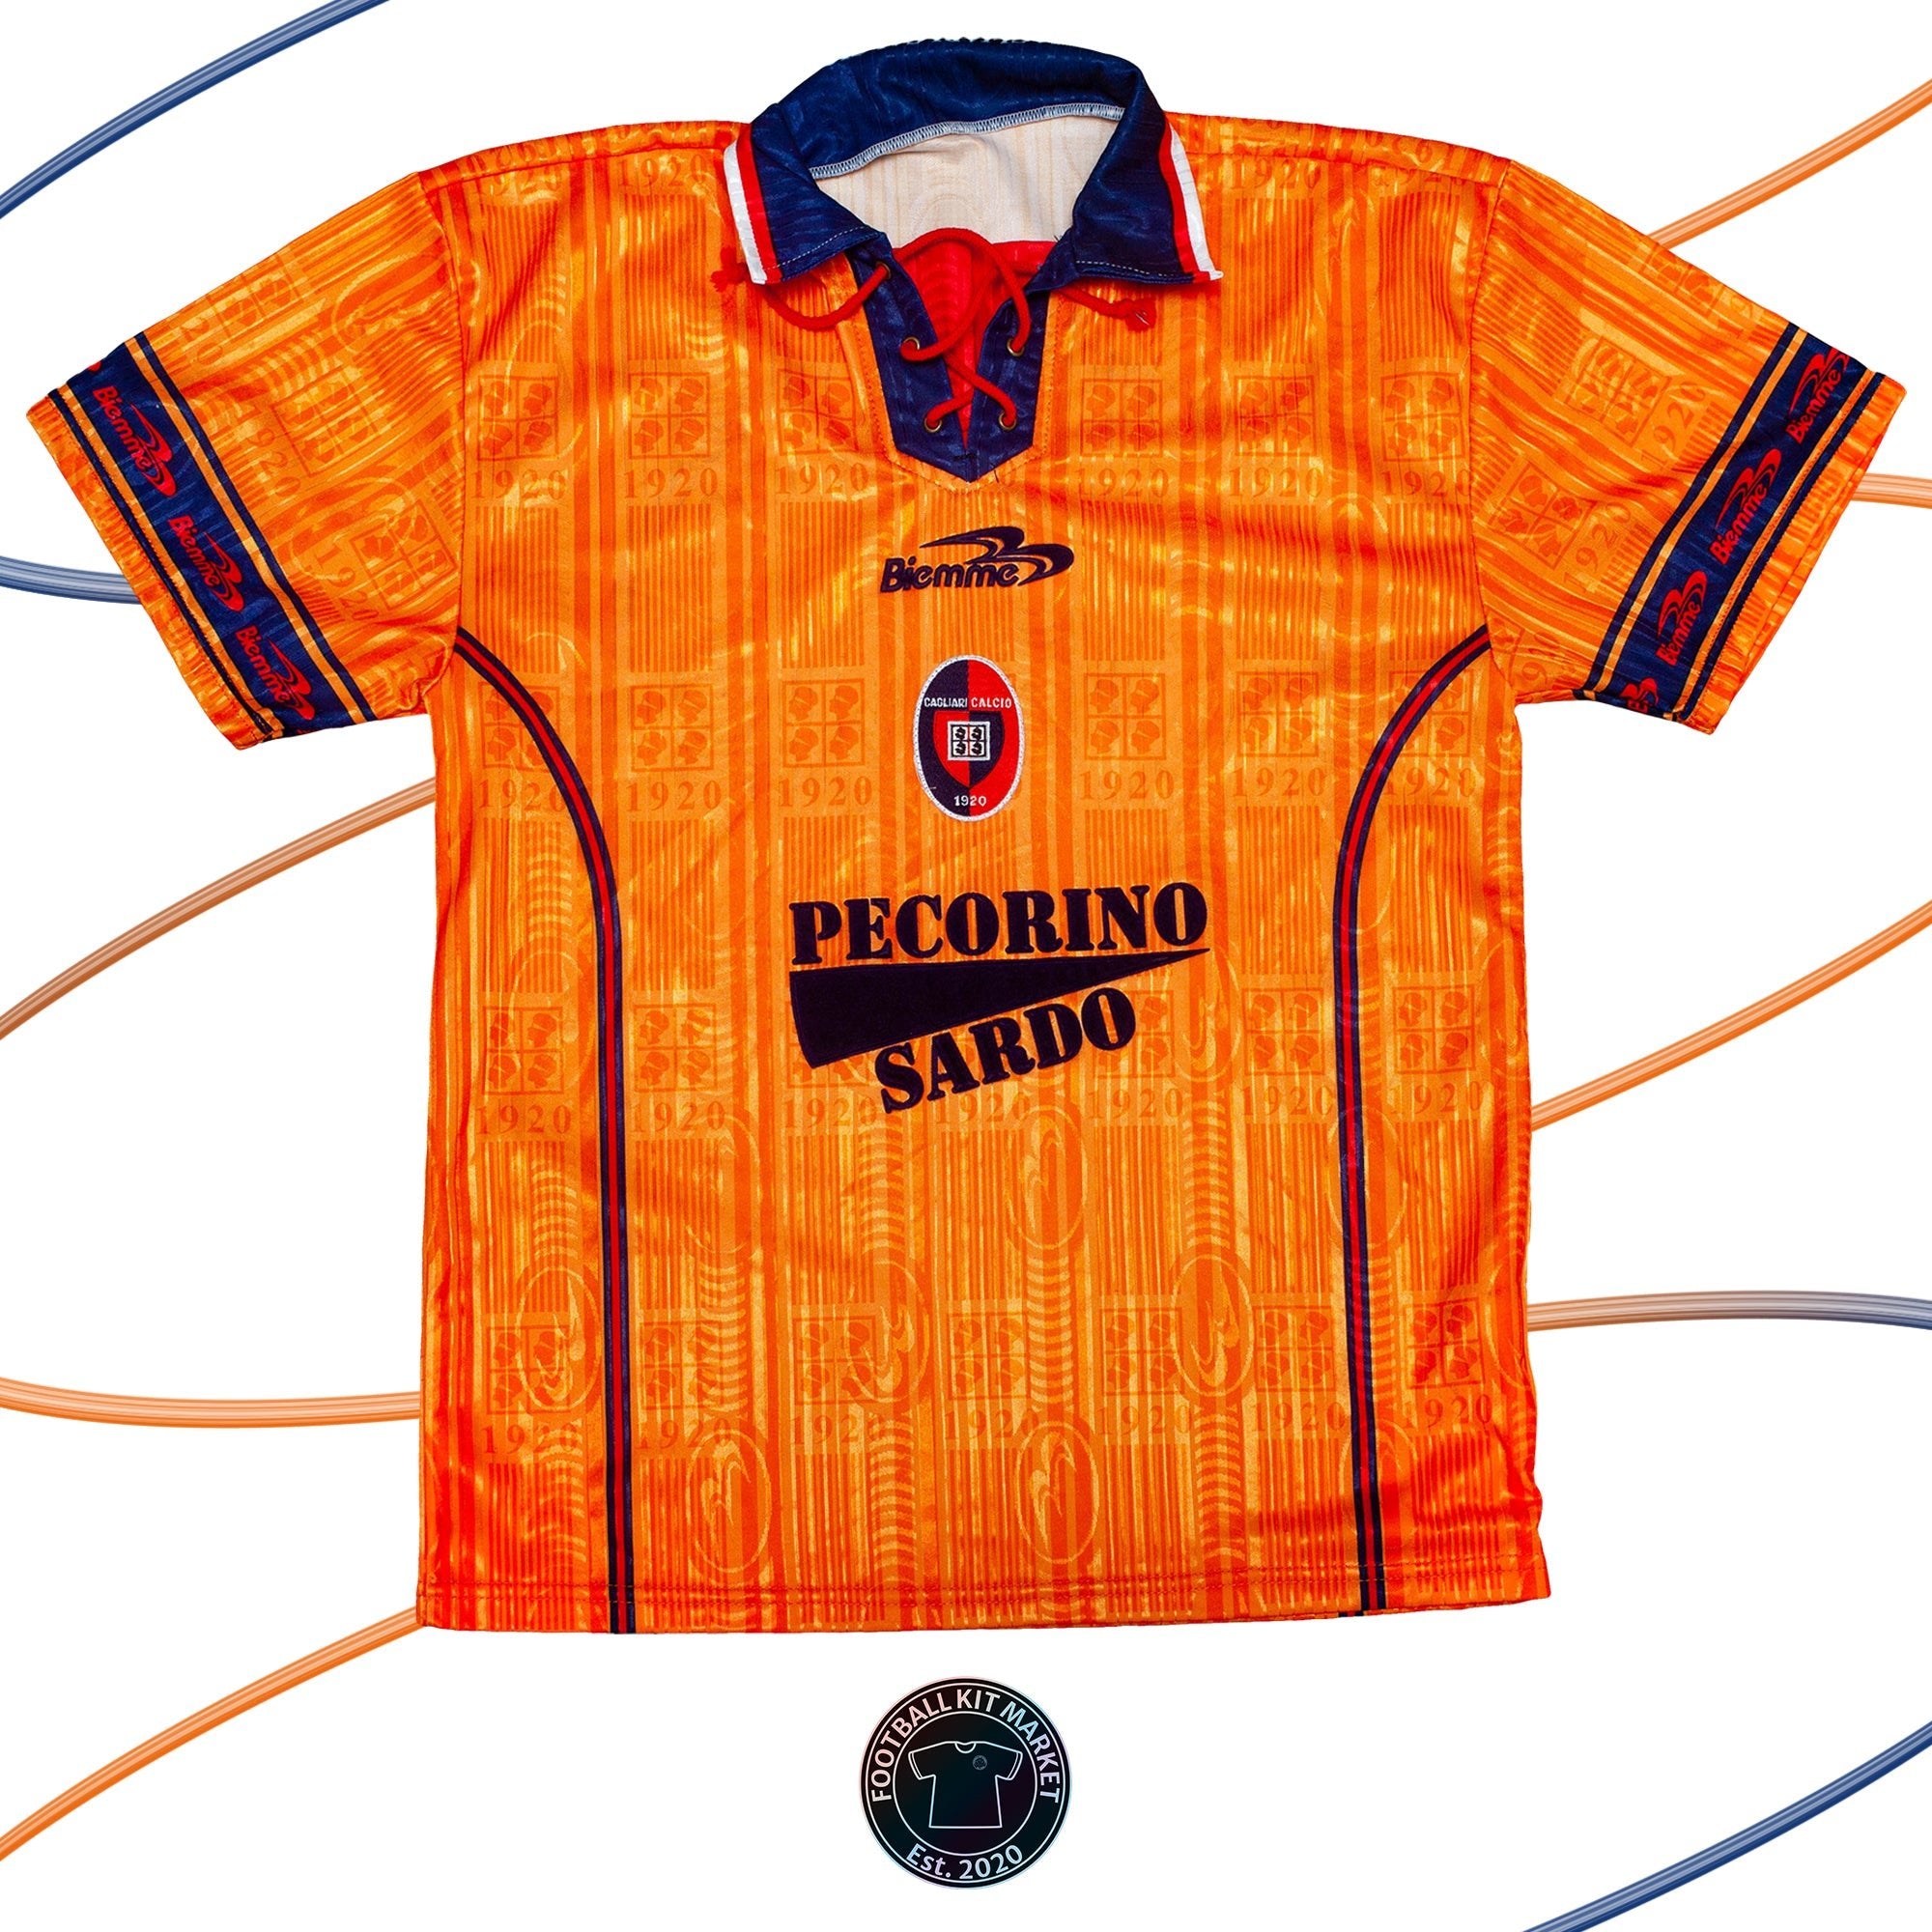 Genuine CAGLIARI 3rd Shirt (1999-2000) - BIEMME (M) - Product Image from Football Kit Market